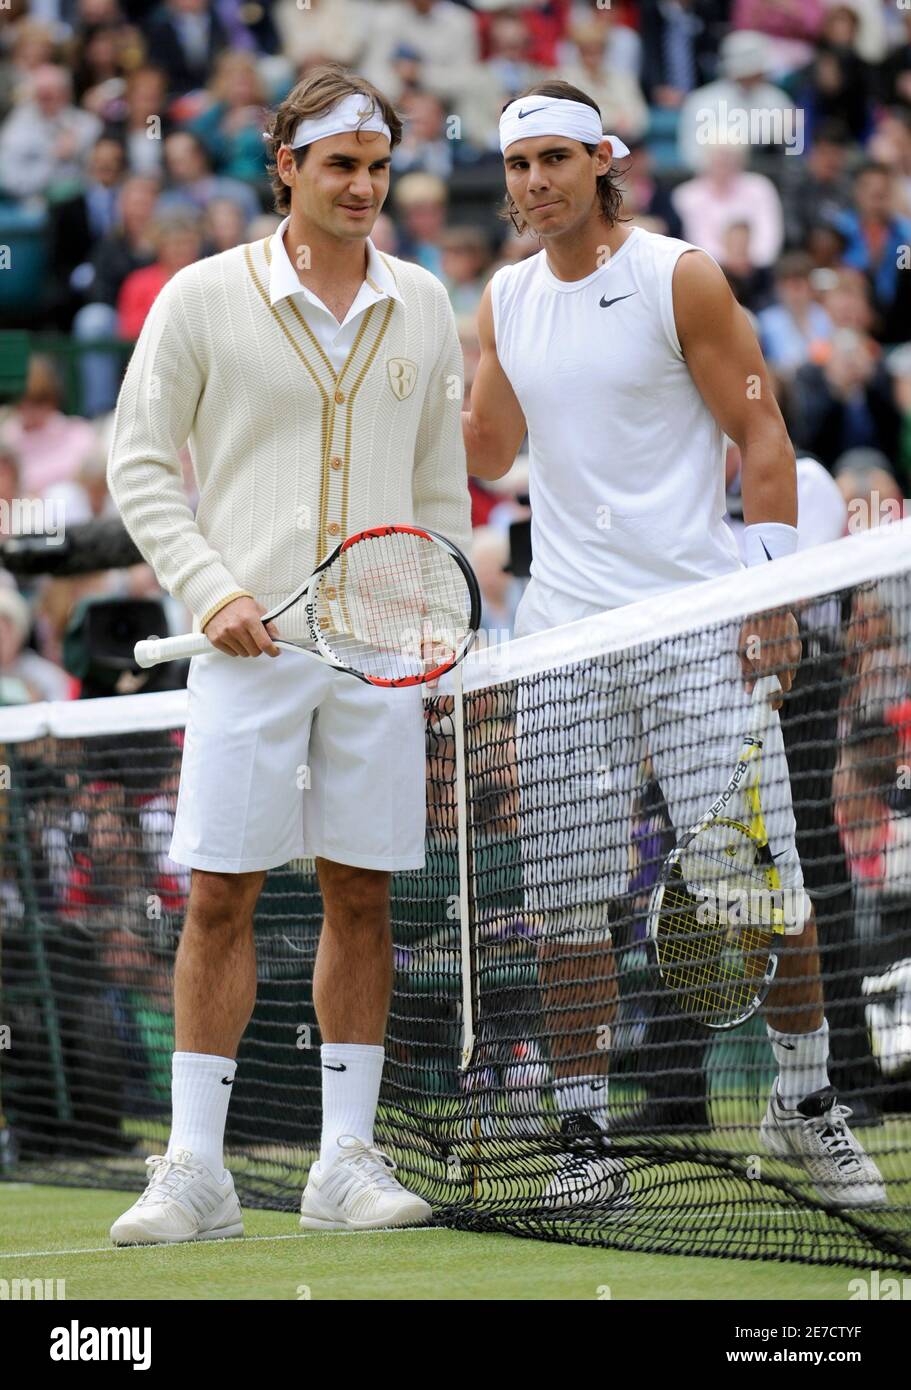 Roger Federer of Switzerland and Rafael Nadal of Spain pose for a  photograph on centre court before their finals match at the Wimbledon  tennis championships in London July 6, 2008. REUTERS/Toby Melville (